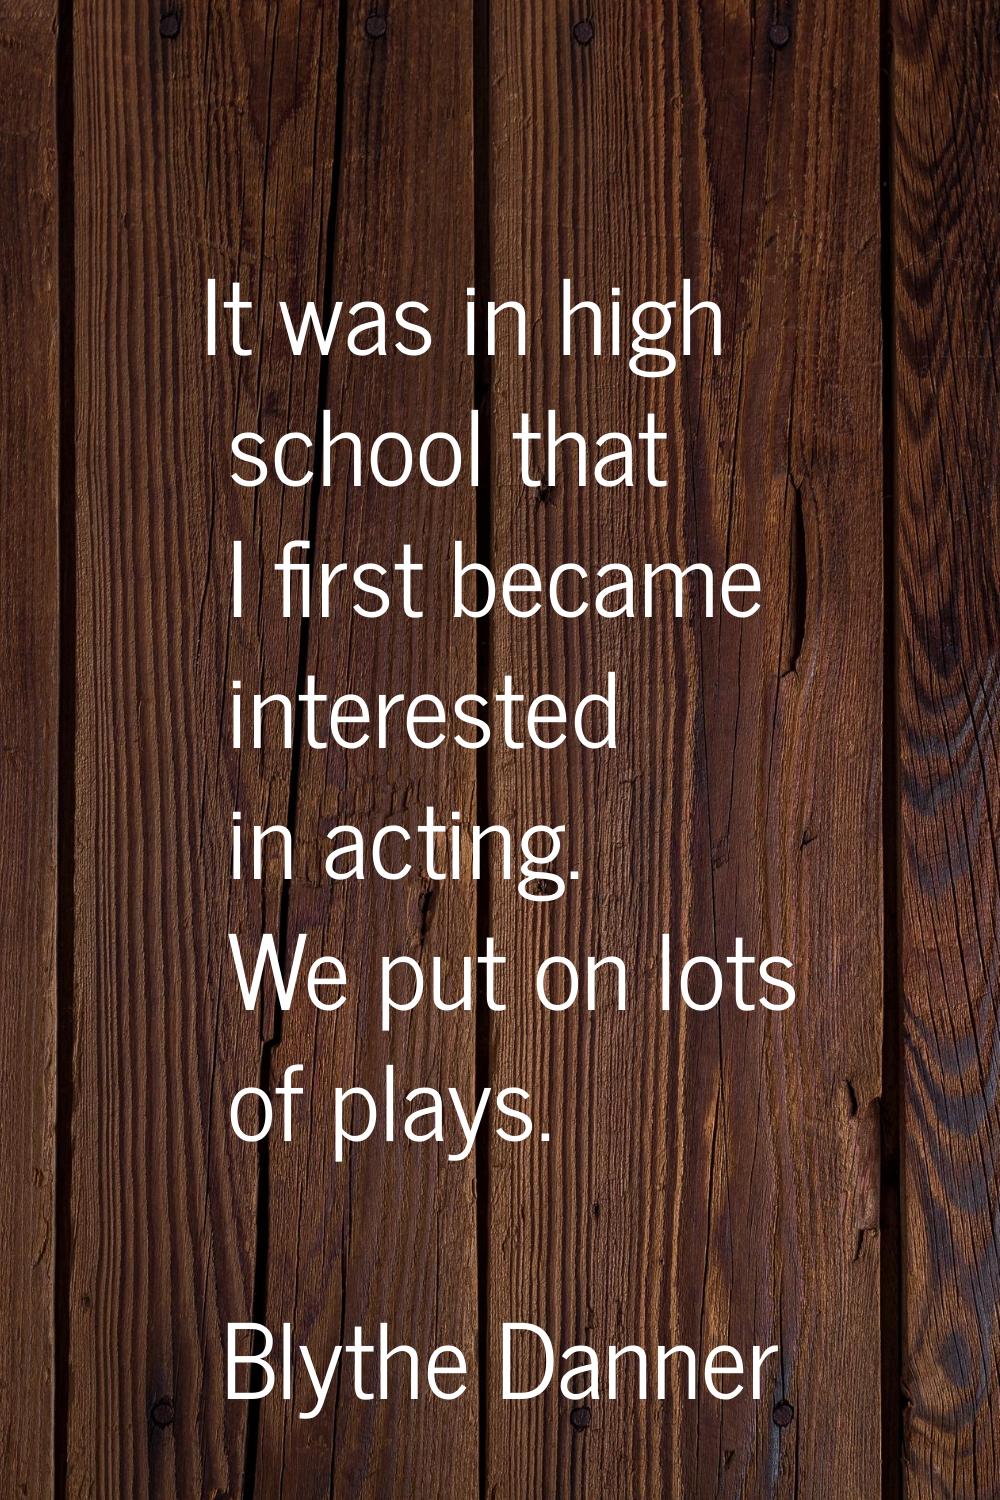 It was in high school that I first became interested in acting. We put on lots of plays.